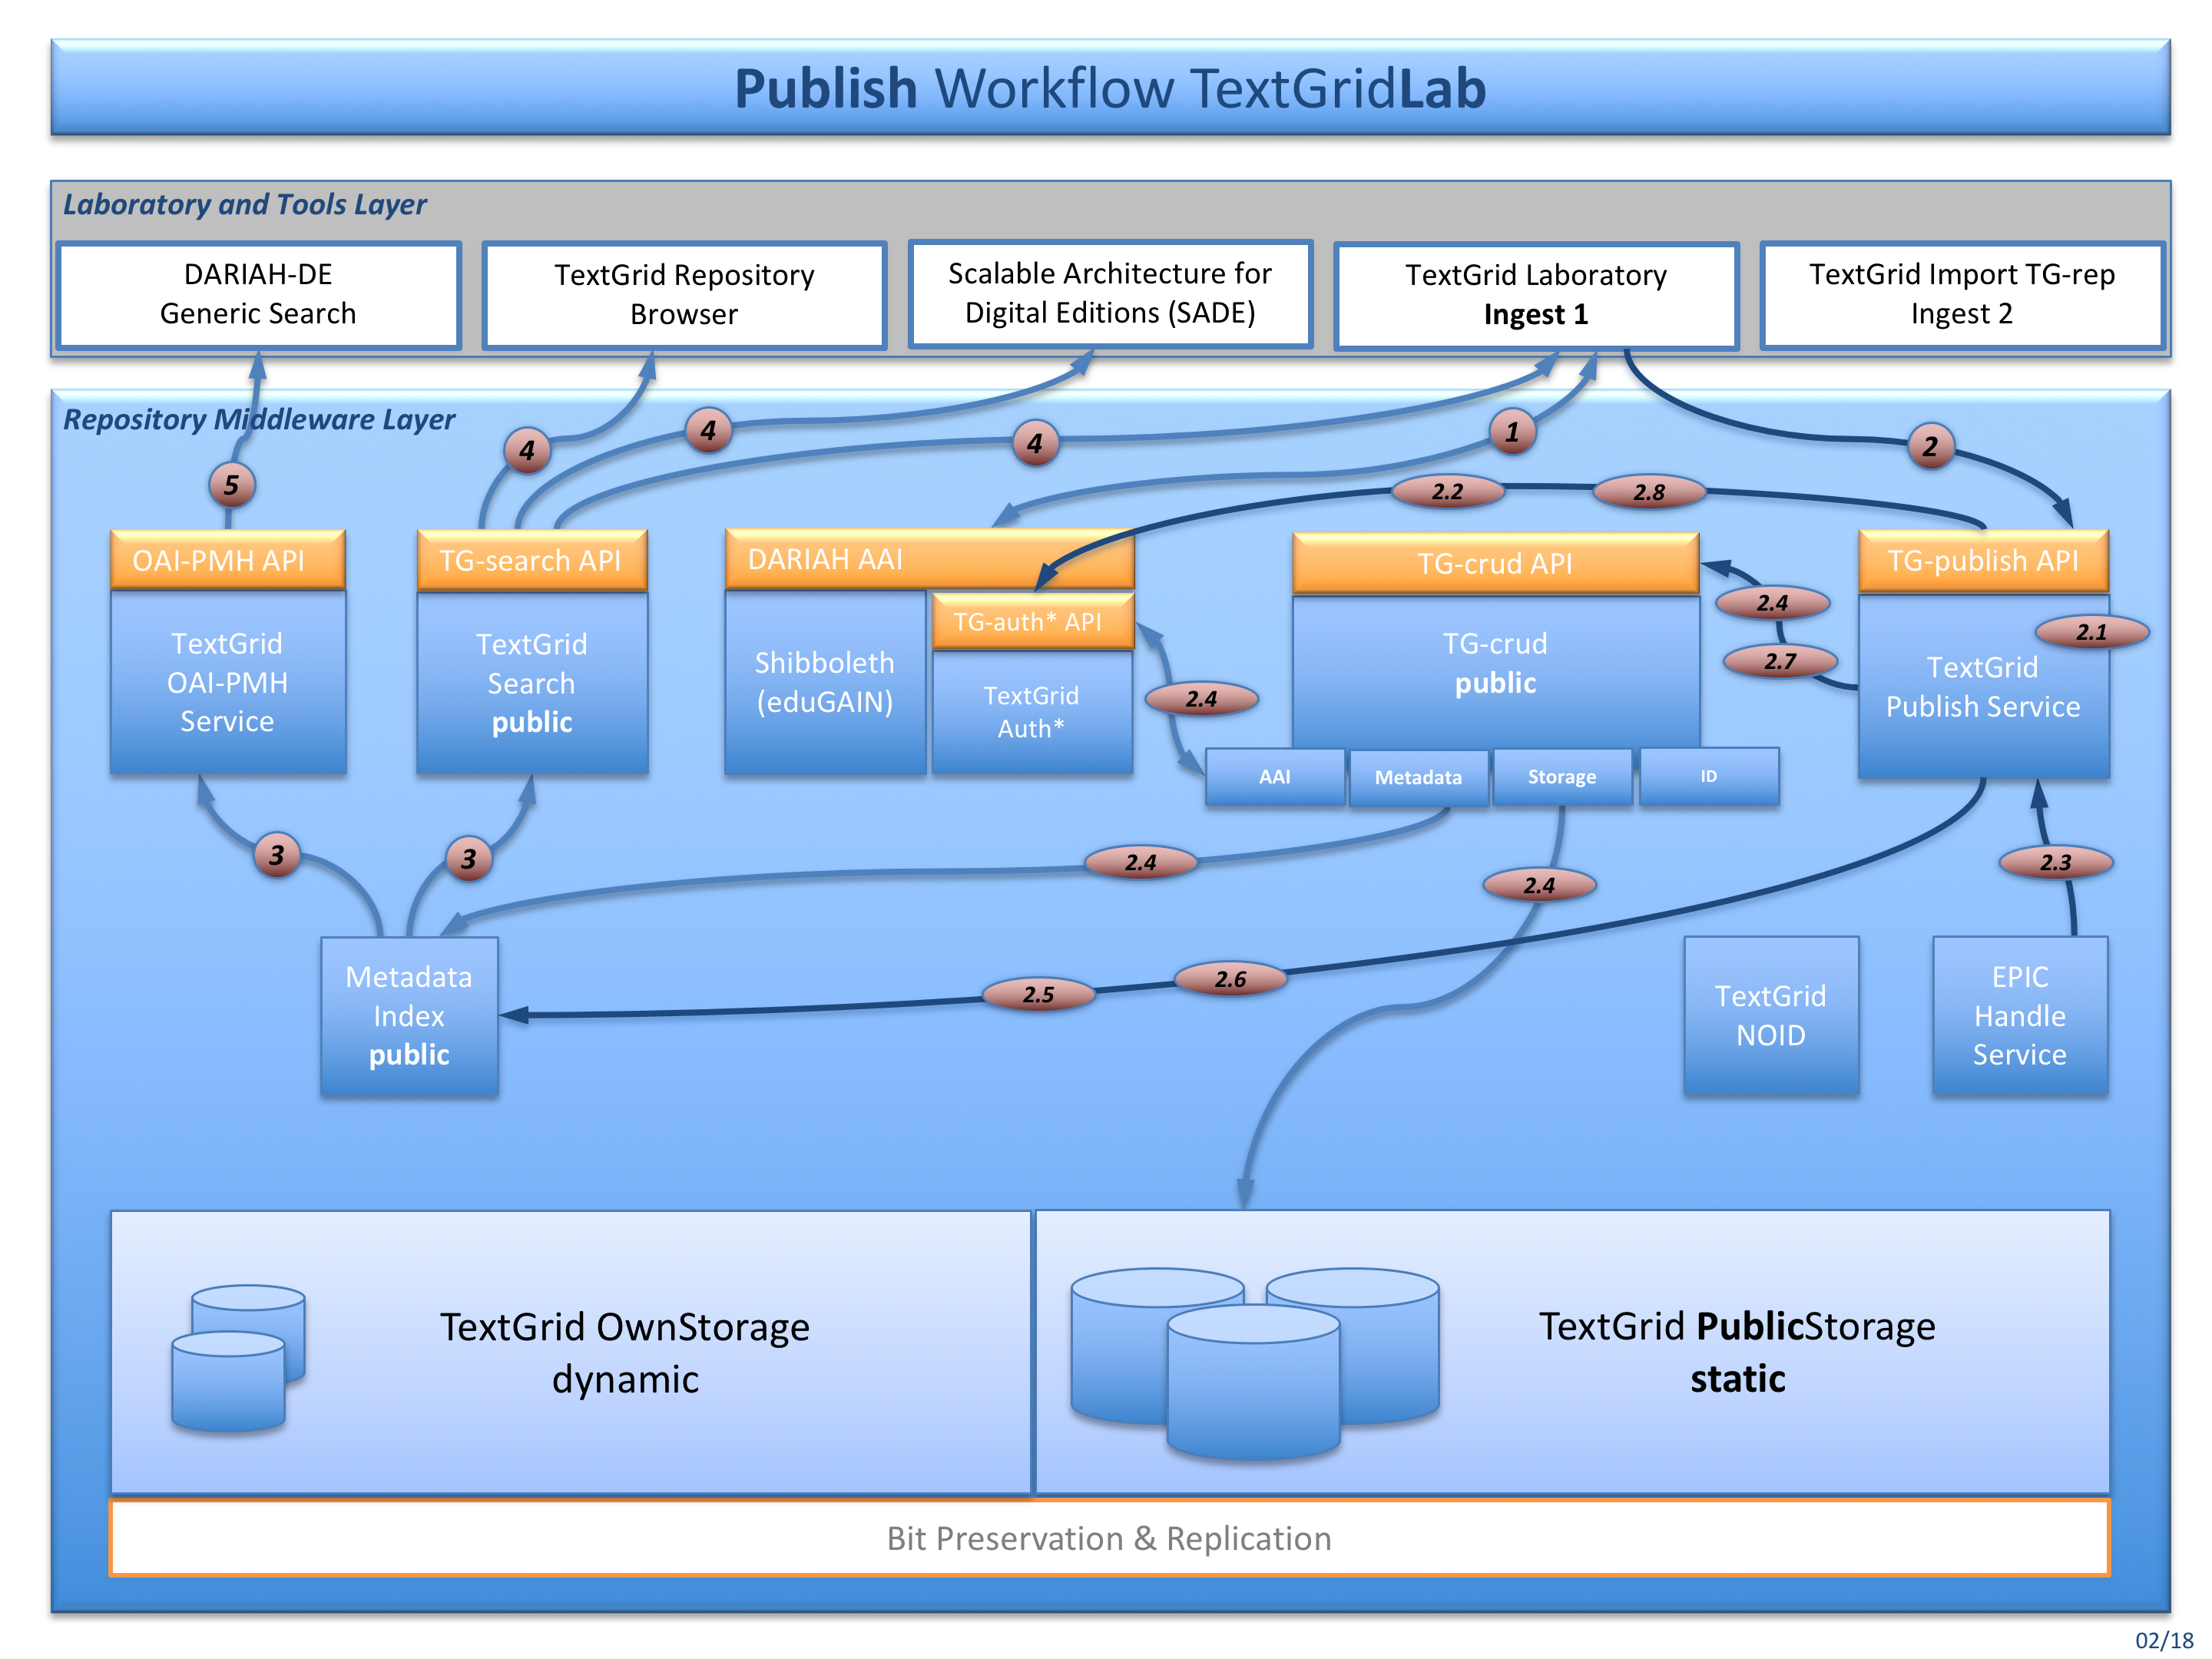 Fig. 3: The publish workflow for publishing data from within the TextGridLab (Ingest 1)